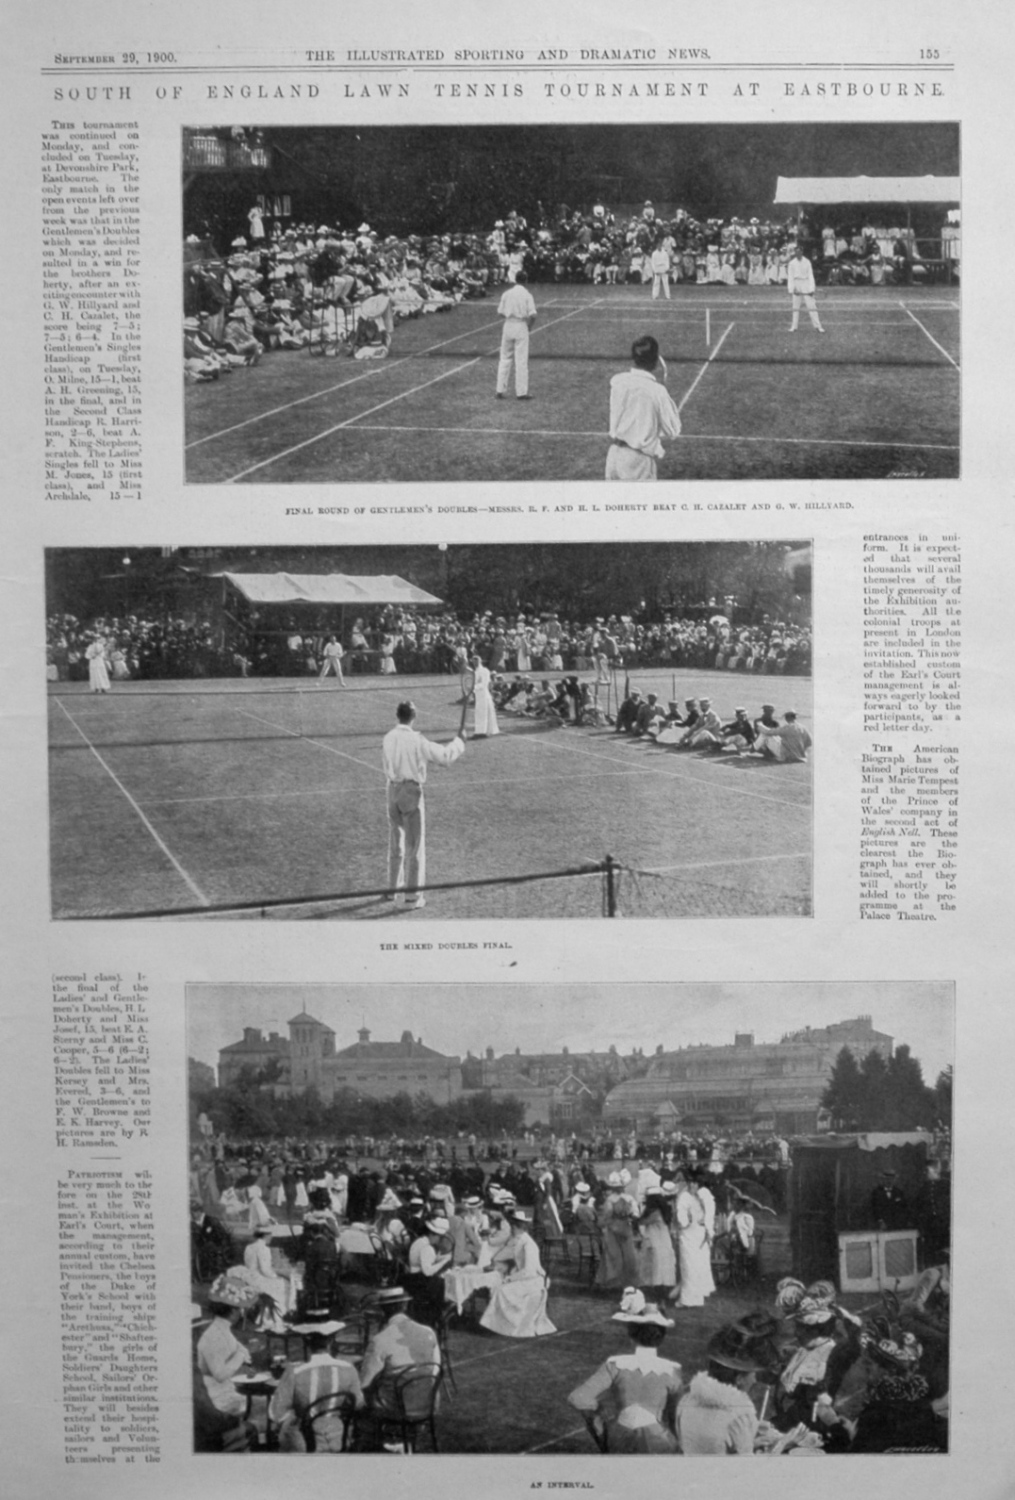 South of England Lawn Tennis Tournament at Eastbourne.